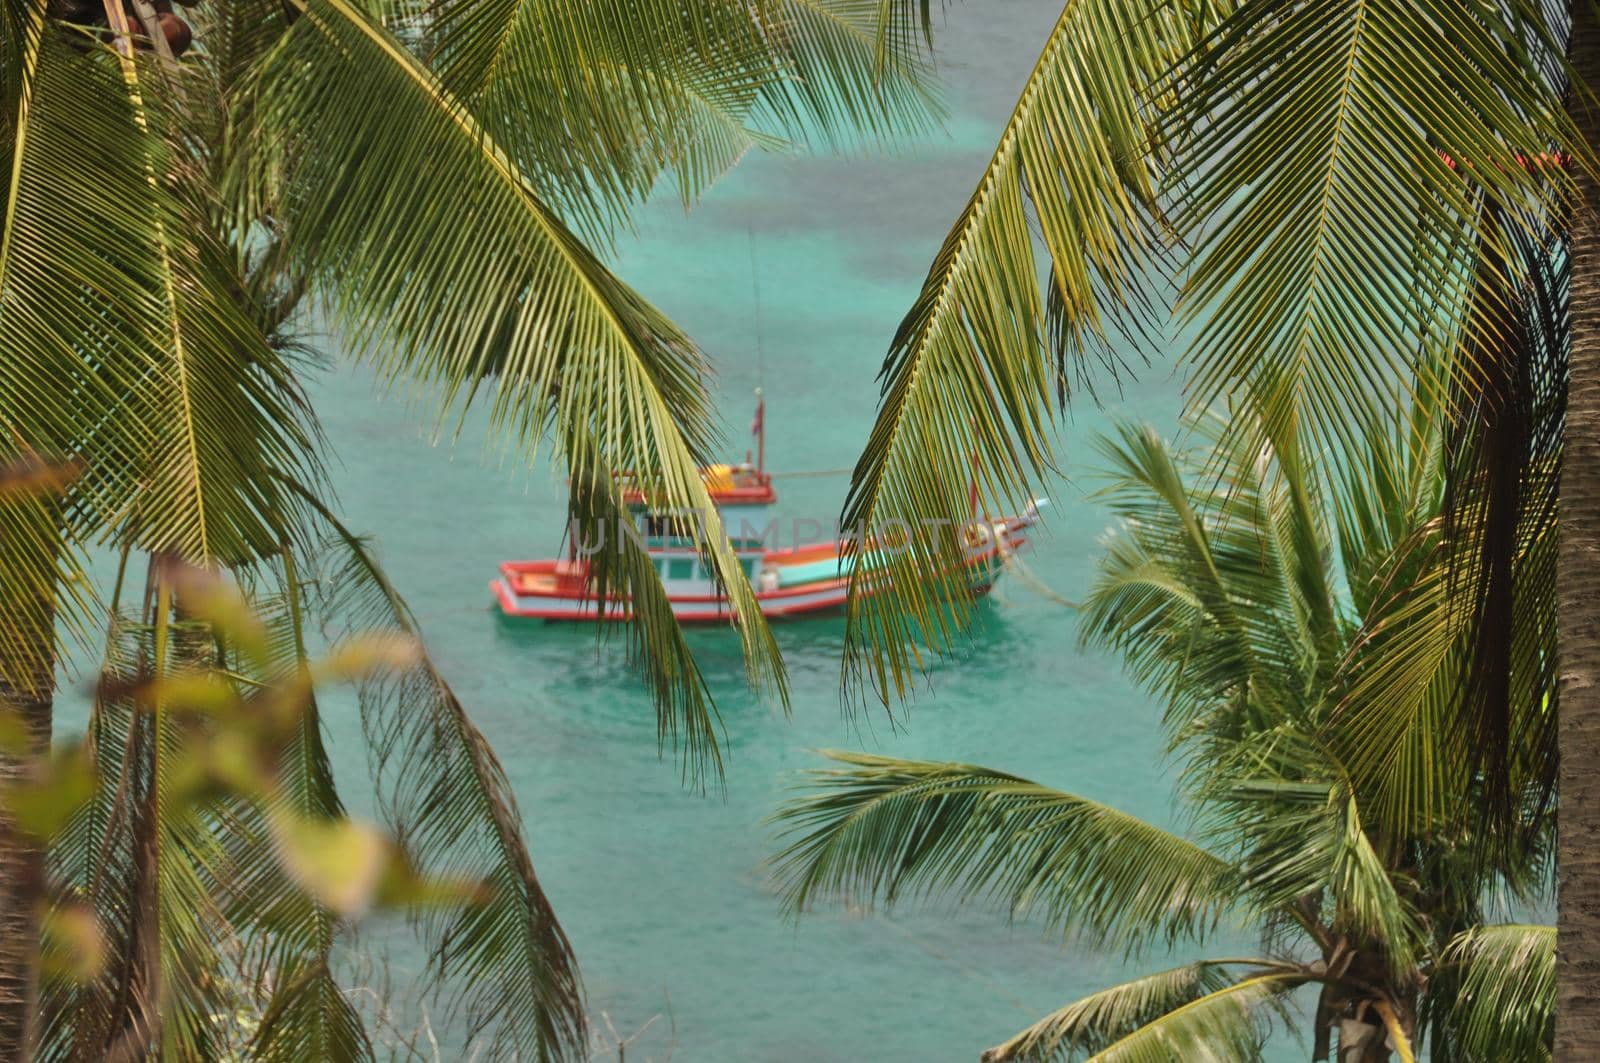 View of sailing fisherman boat in turquoise water of seashore among lush green palms. Green palm trees with boat in blue water. Tropical padadise island life